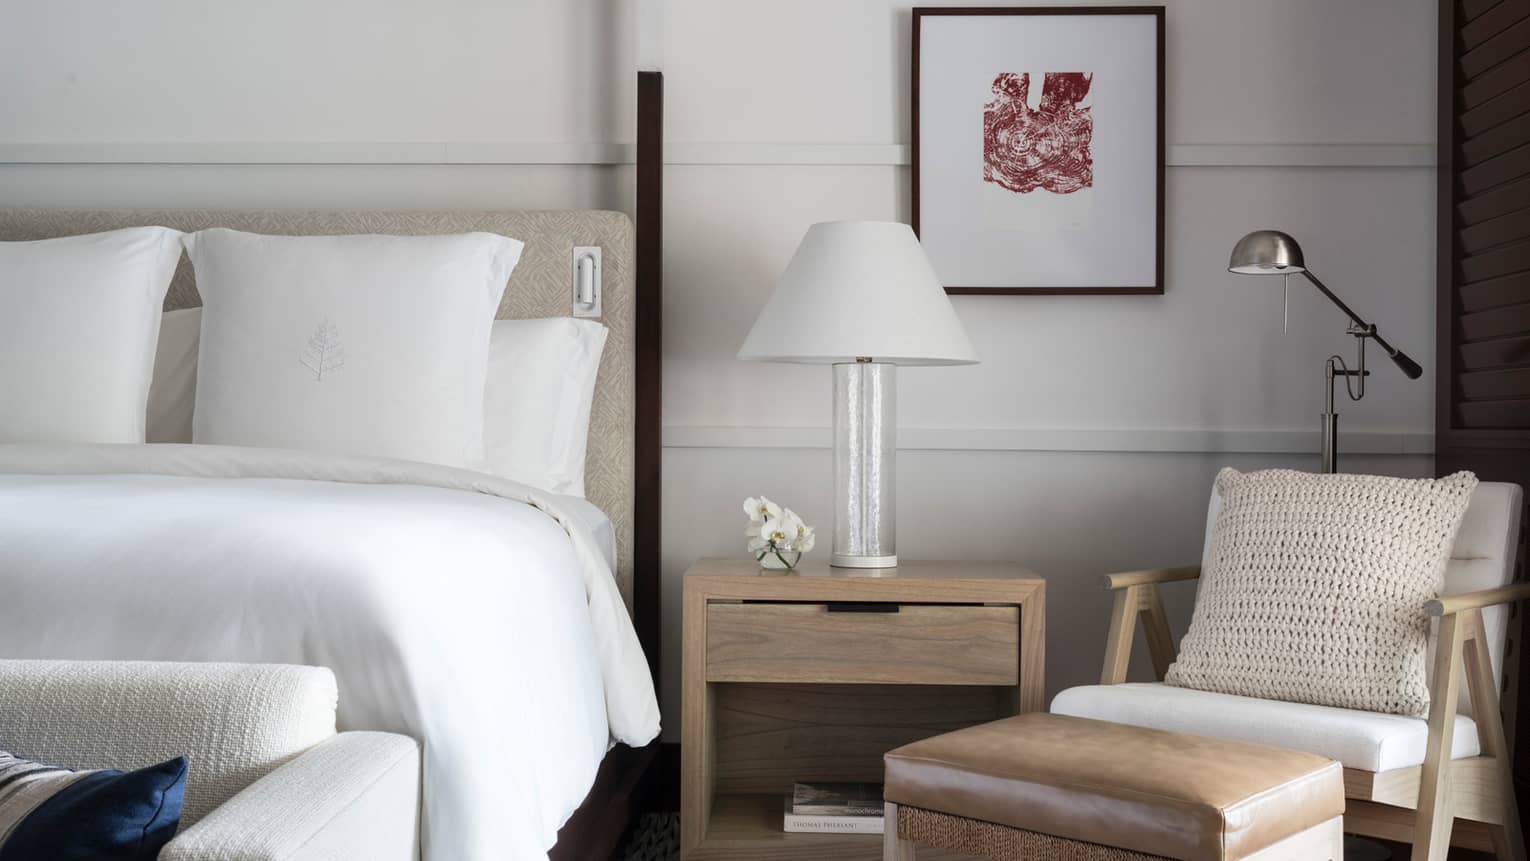 Close-up of white hotel bed, nightstand with white lamp, modern armchair and leather footstool